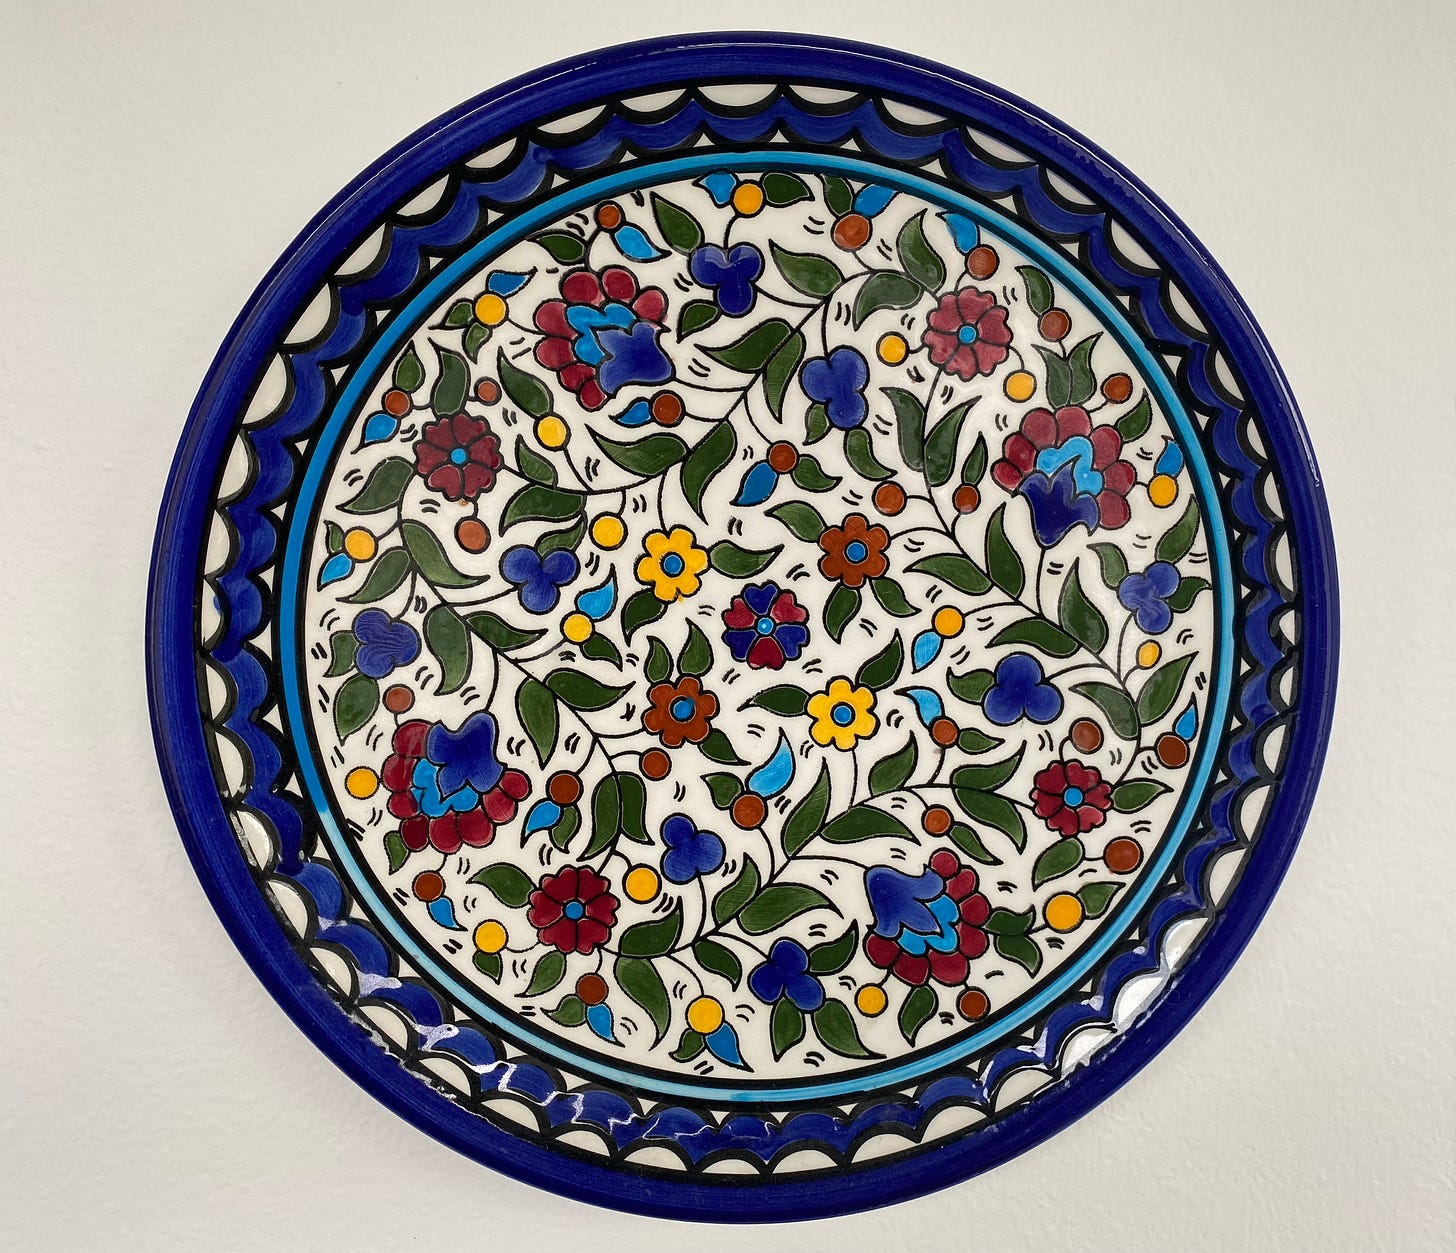 Photograph of a colorful plate with flower motifs. 